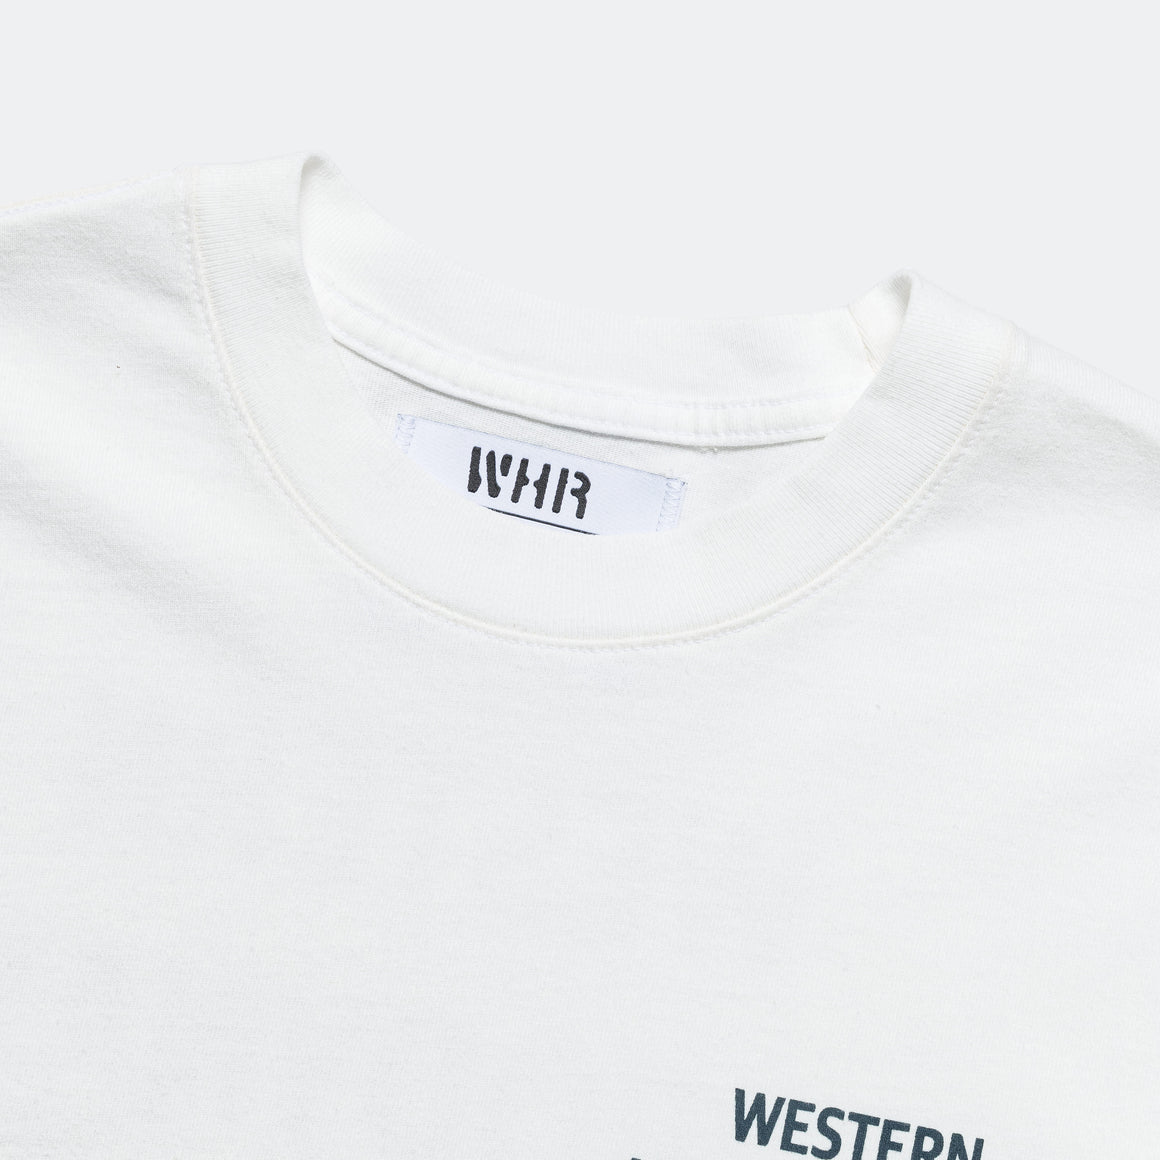 Western Hydrodynamic Research - Worker S/S Tee - White - UP THERE